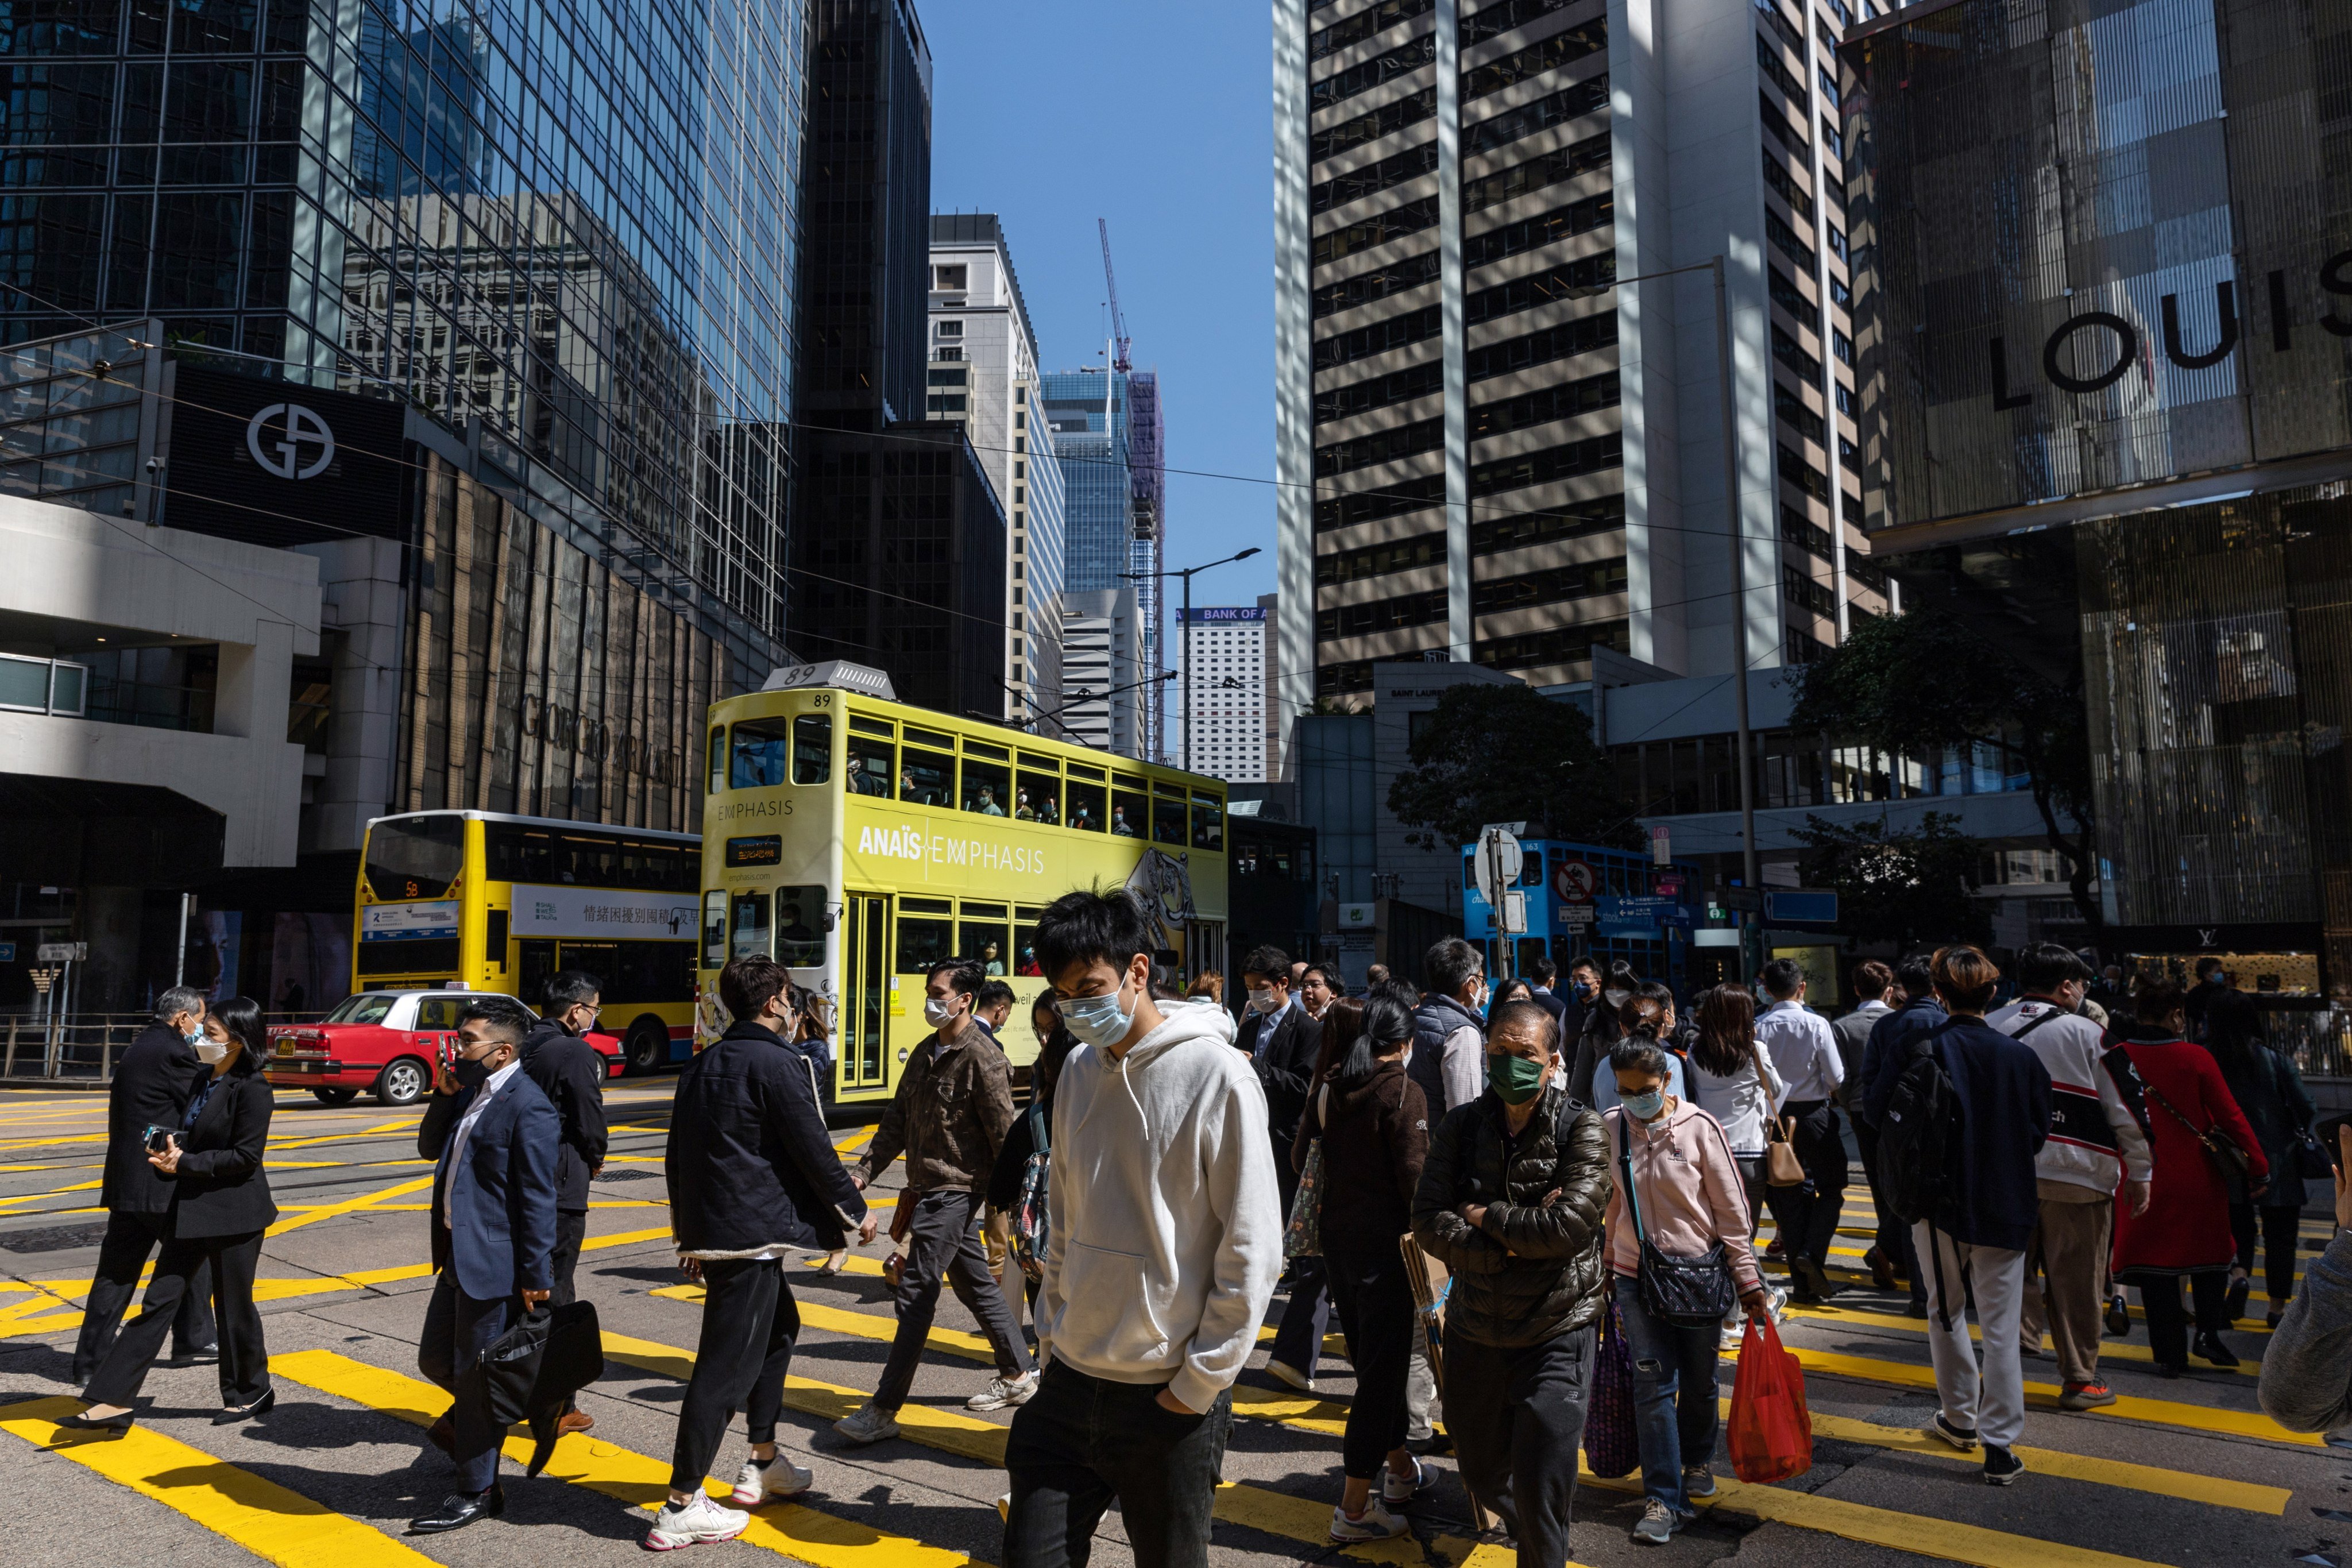 Pedestrians cross an intersection in Hong Kong on February 22. Hong Kong’s finance chief has unveiled a HK$761 billion budget, plunging into the coffers to support the city’s post-Covid recovery. Photo: EPA-EFE